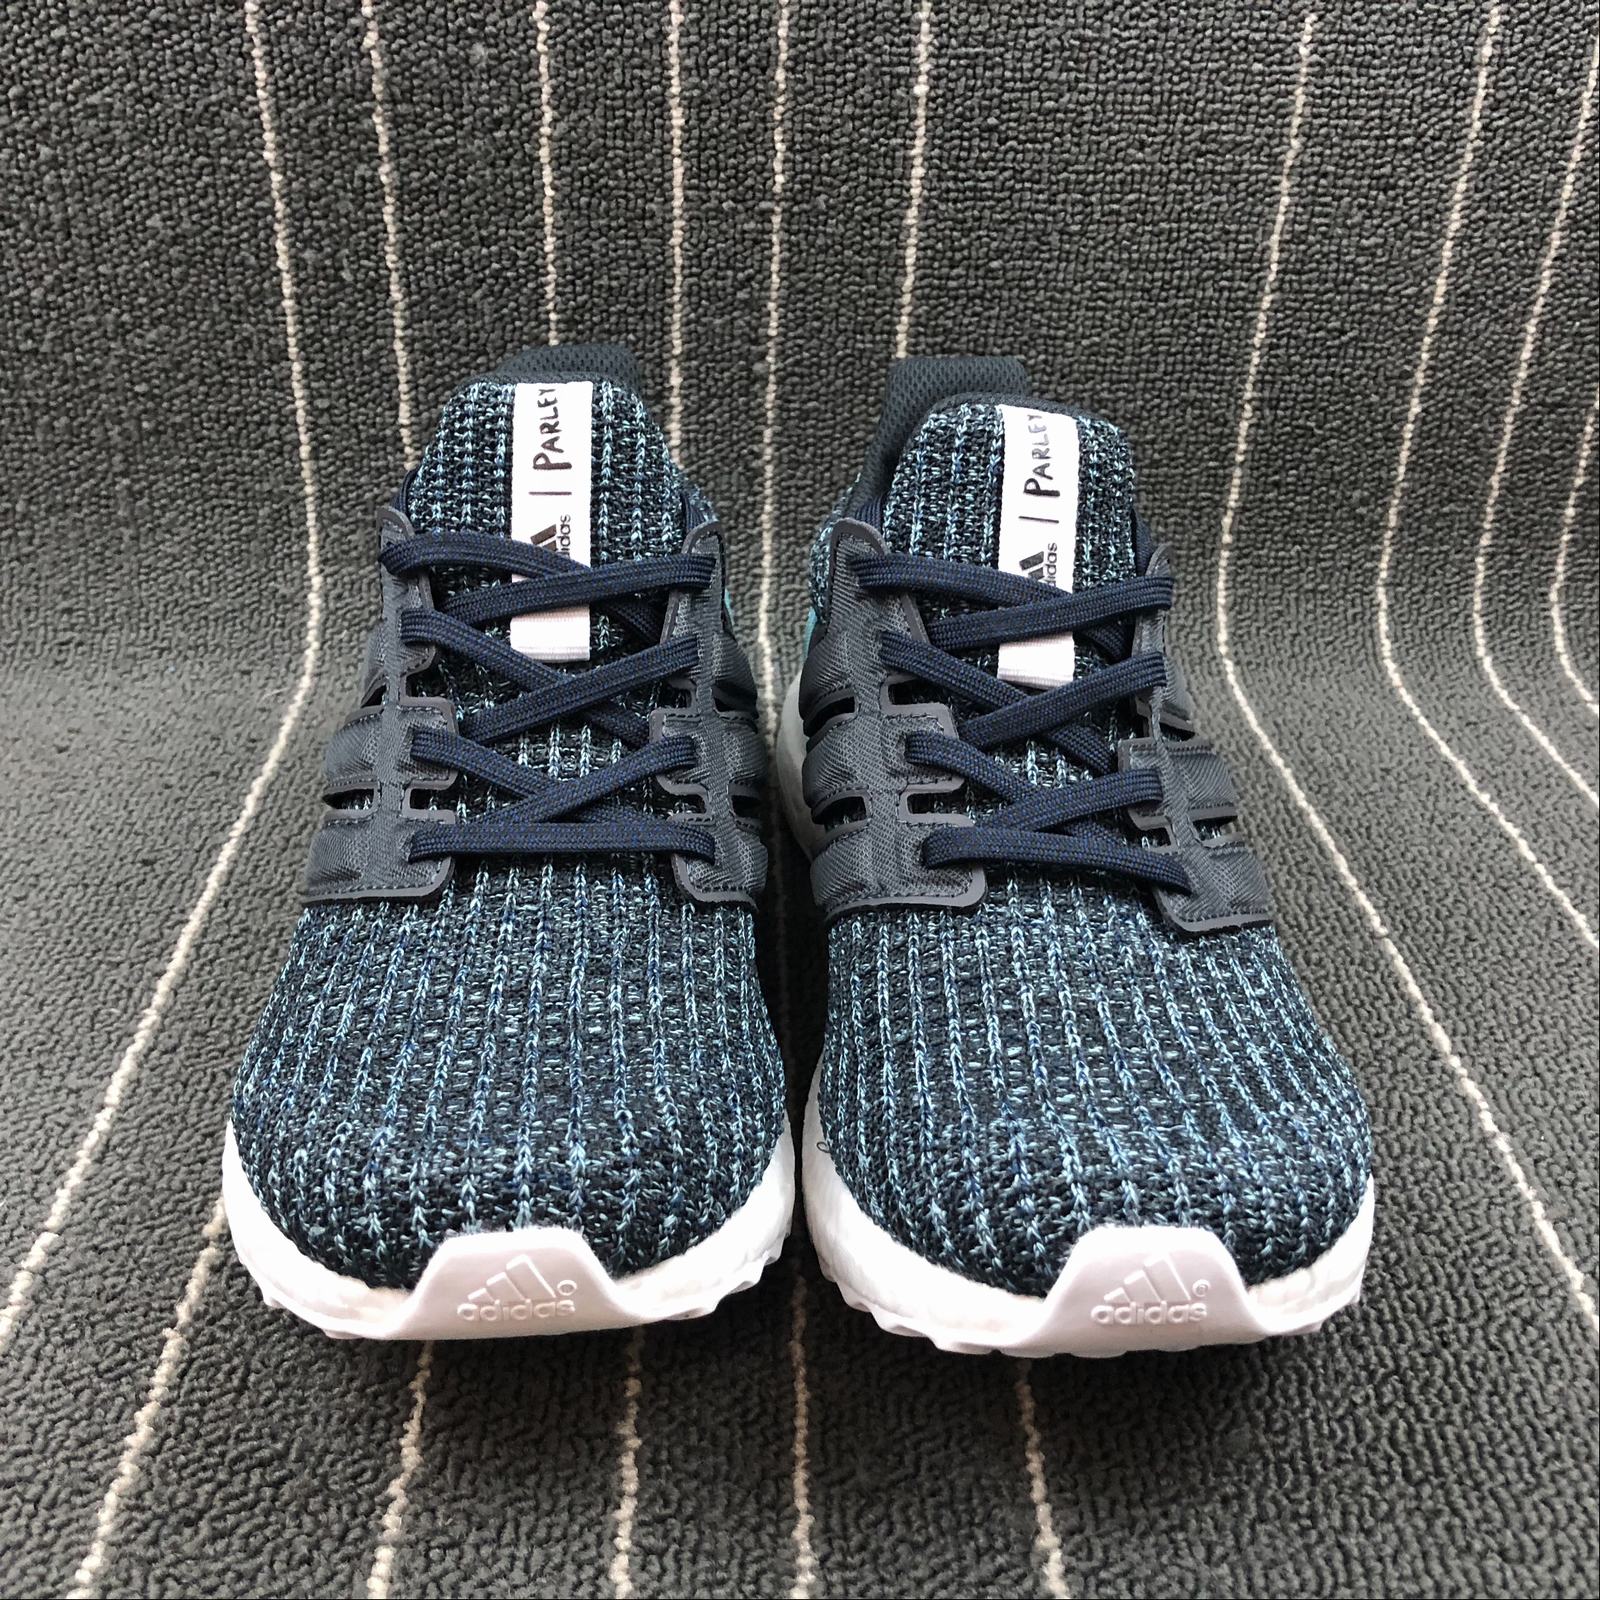 adidas ultra boost 4.0 parley carbon